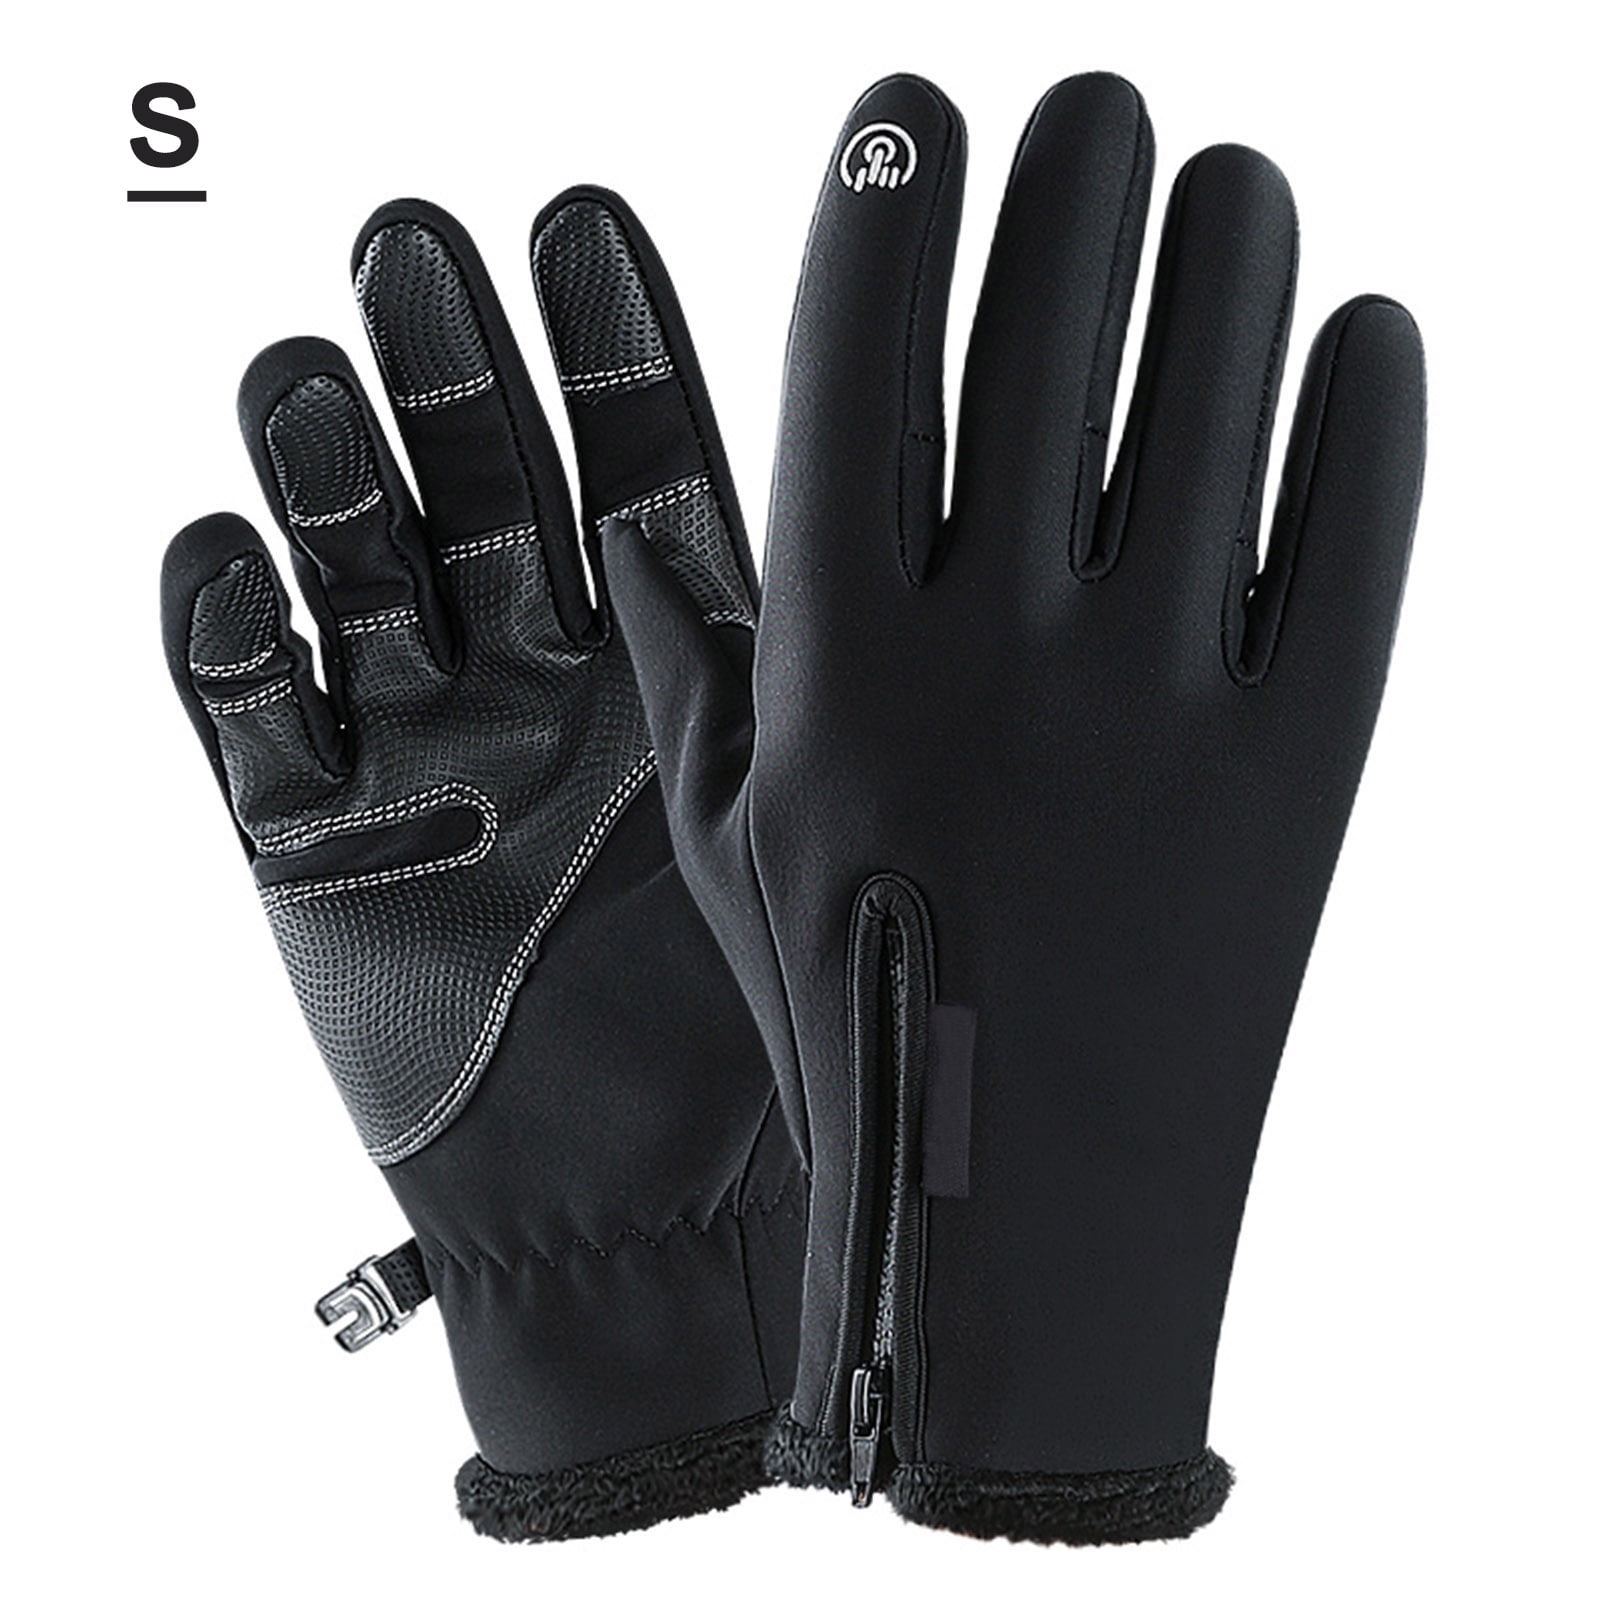 Adult Gray-H/G Warm & Cozy Winter Gloves Details about   NEW 